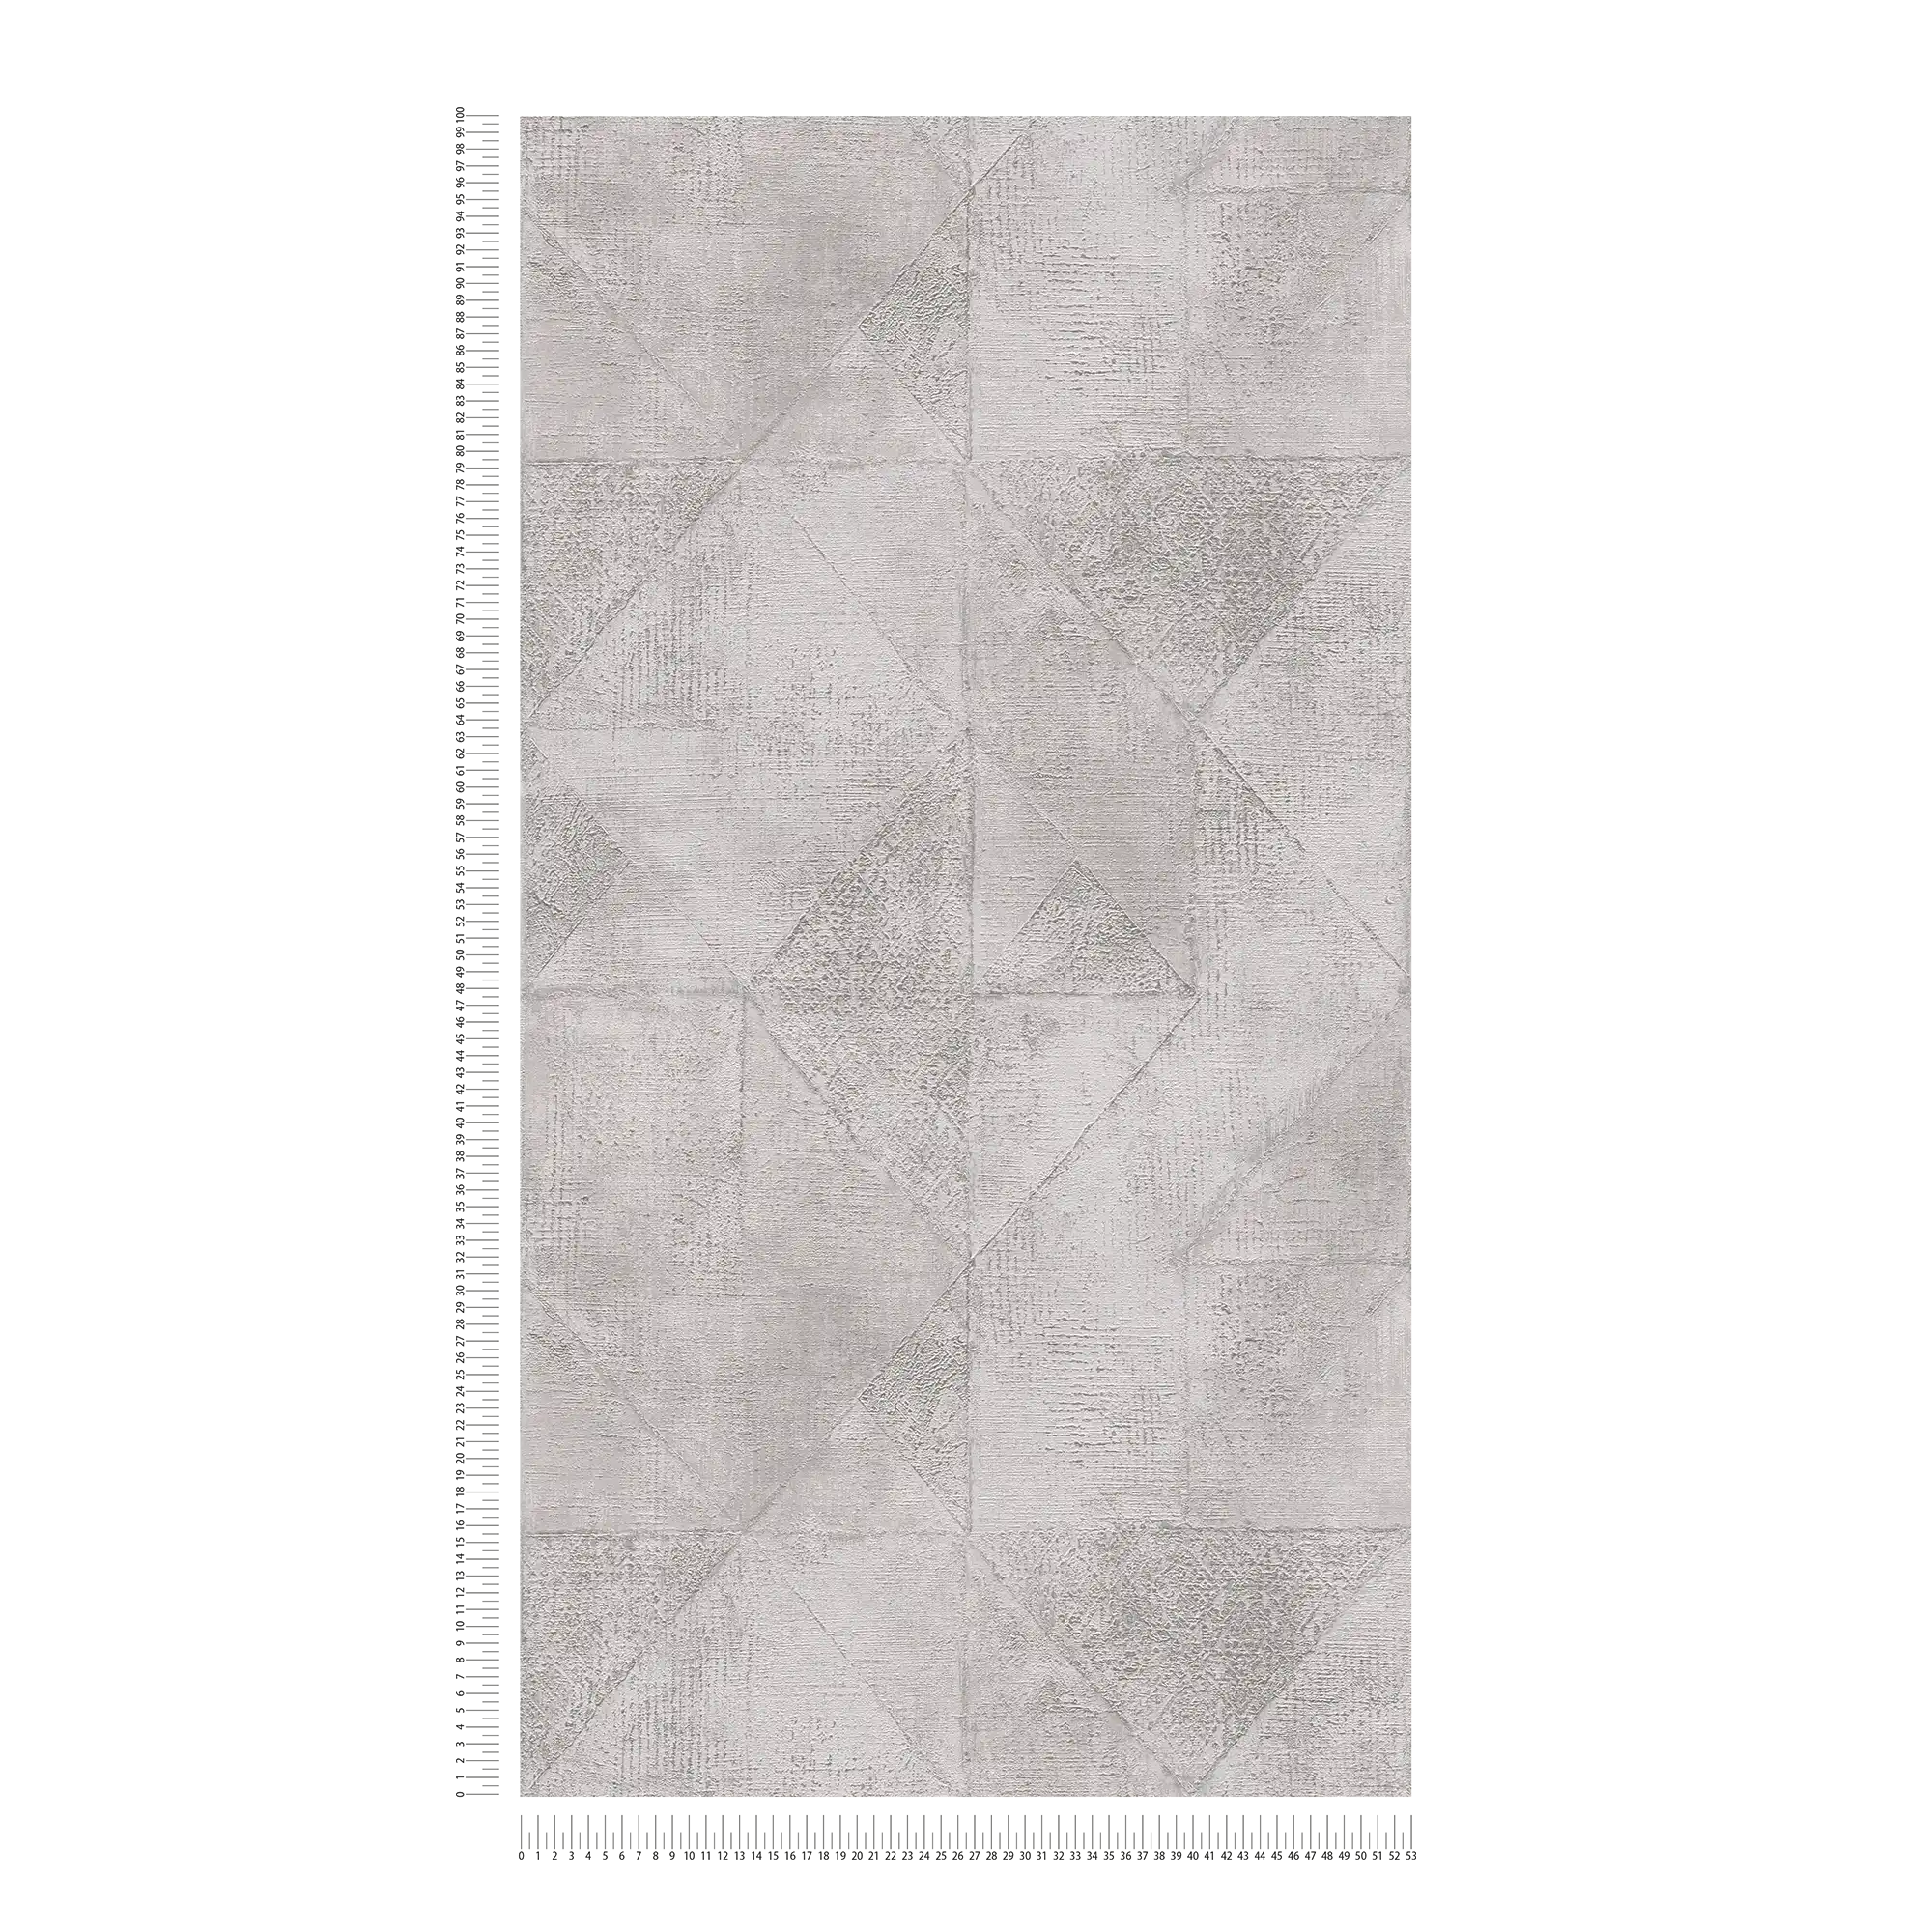             Wallpaper with graphic triangle pattern metallic glossy textured - grey, silver
        